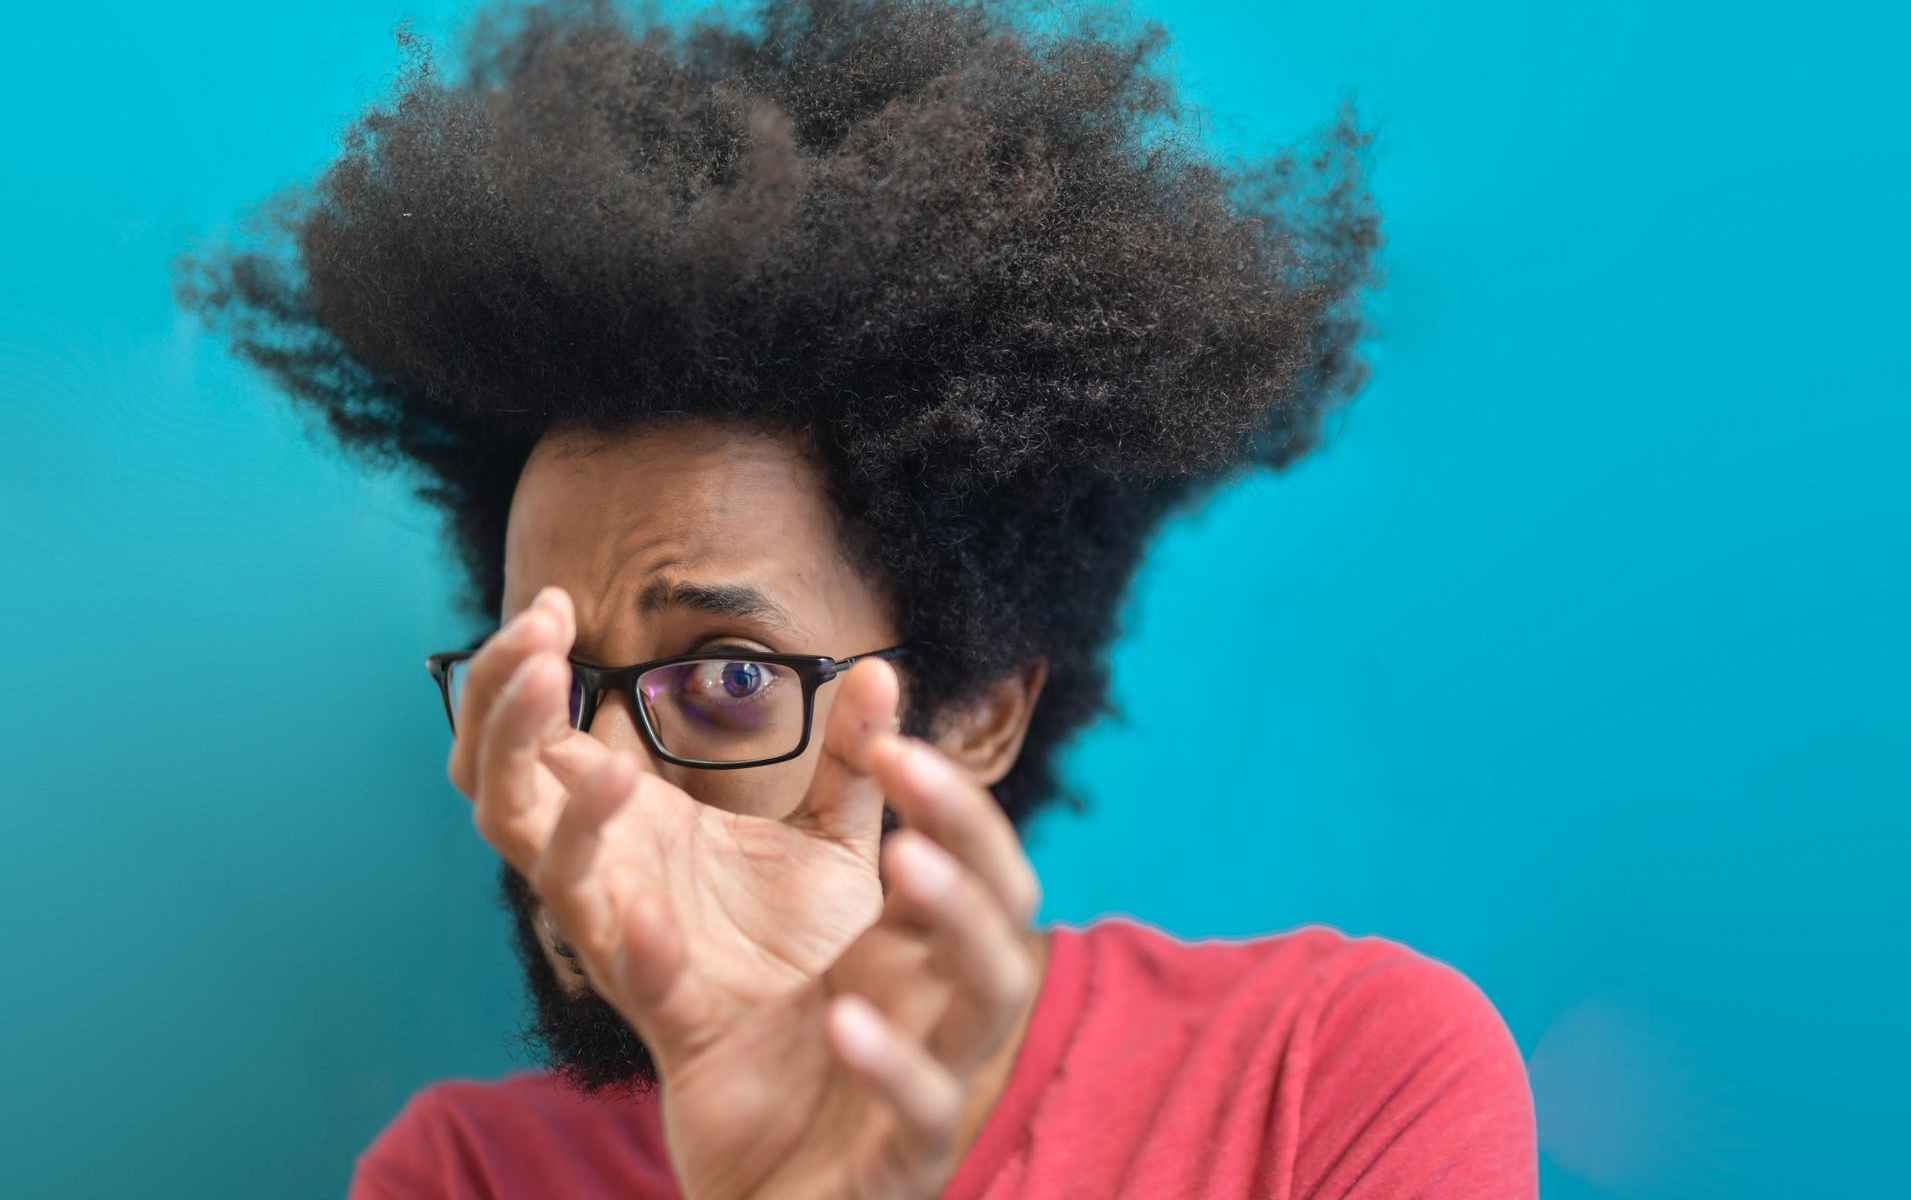 Black man with afro and glasses holding hands in front of left eye